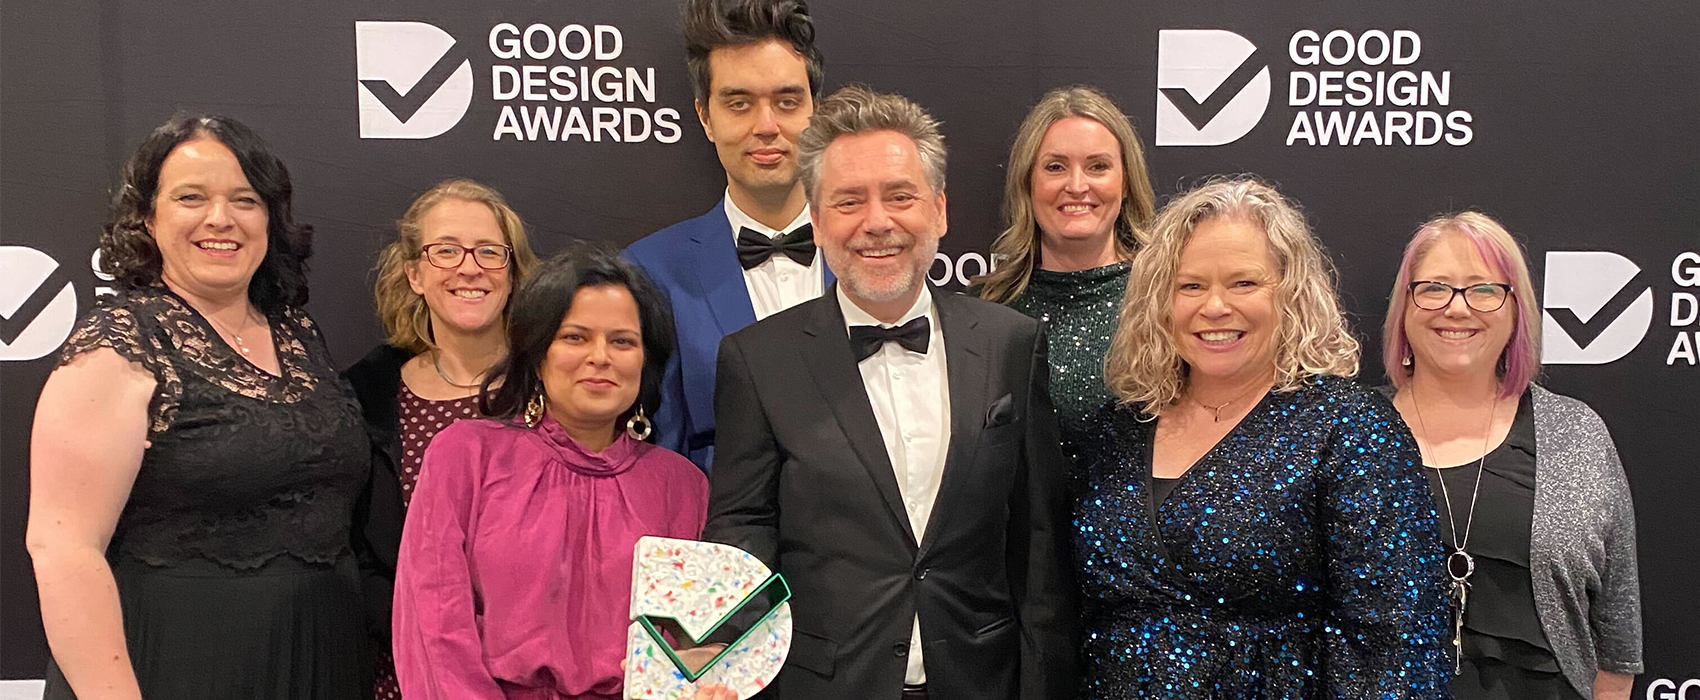 Department of Health, University of Melbourne and Liquid Interactive team members at the Good Design Awards ceremony.